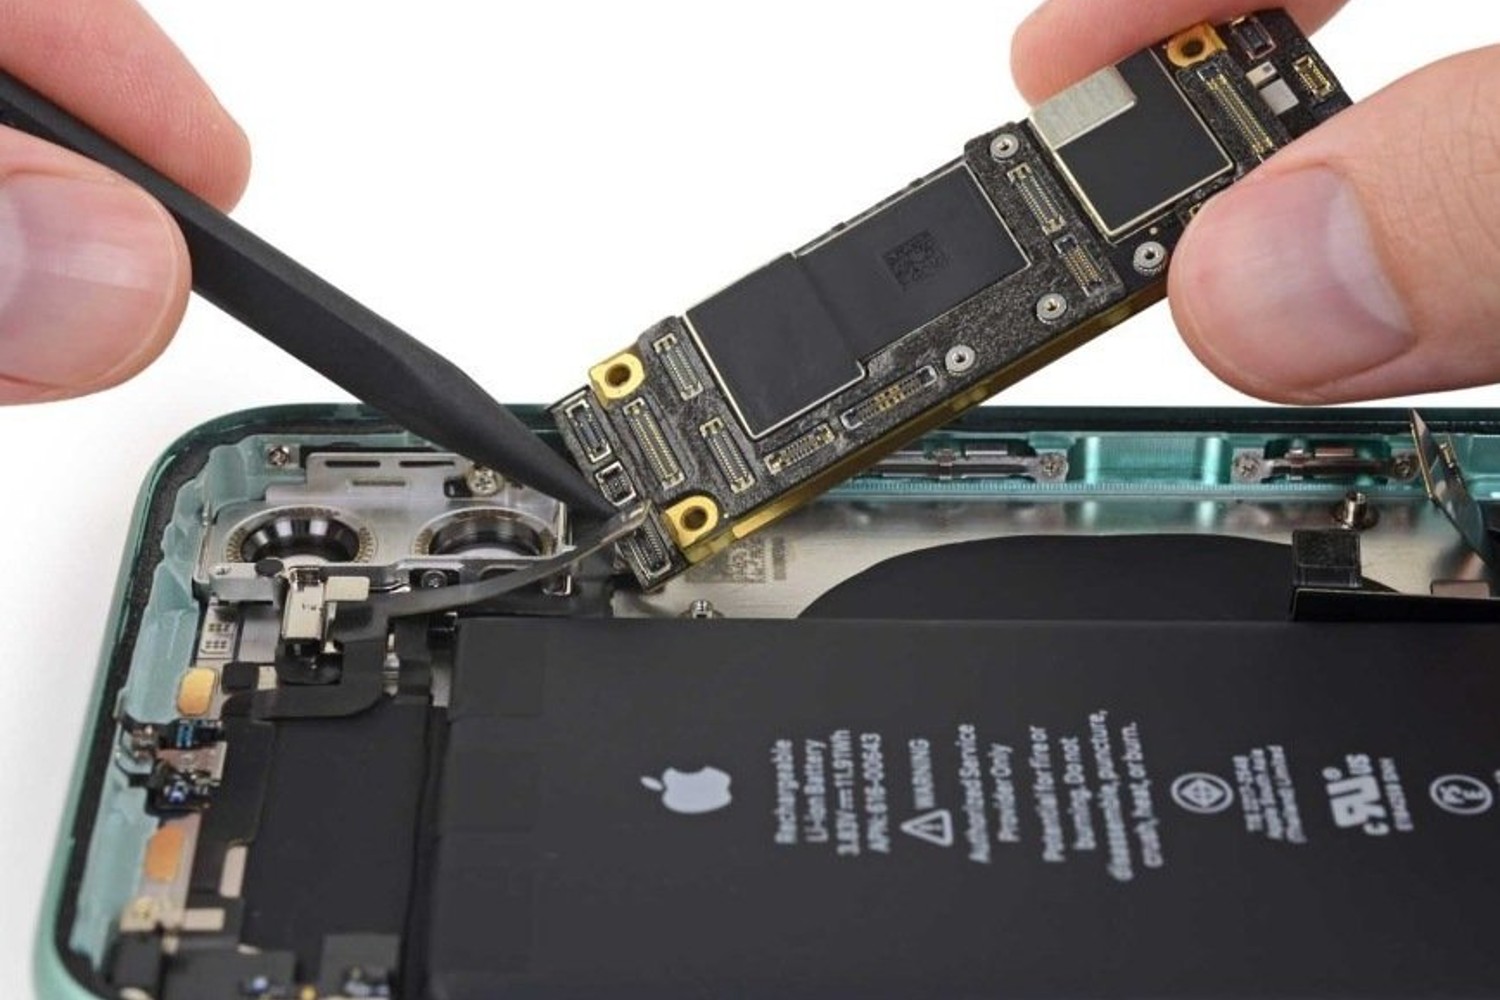 Someone repairing an iPhone with an iFixit kit